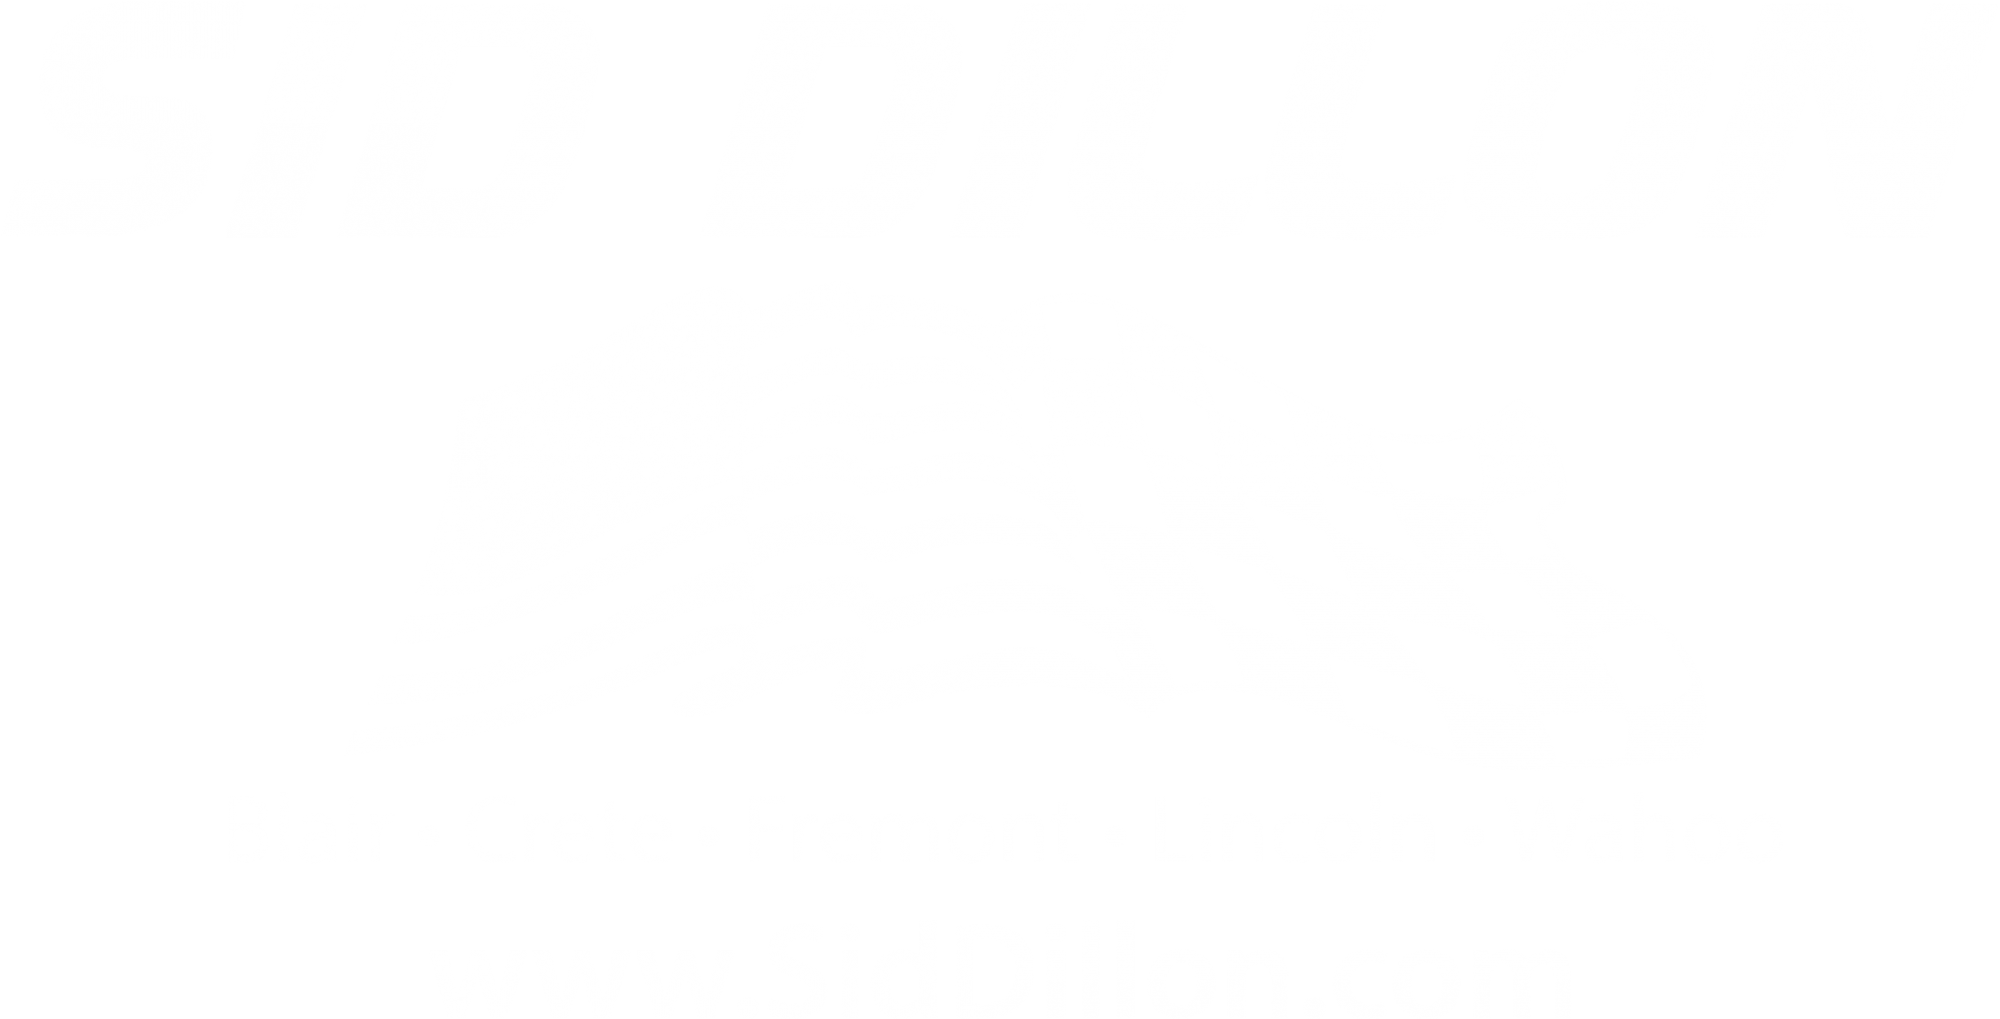 "You are what drives us Sid Dillon" written above an American flag with names of towns and "www.siddillon.com" written underneath it.